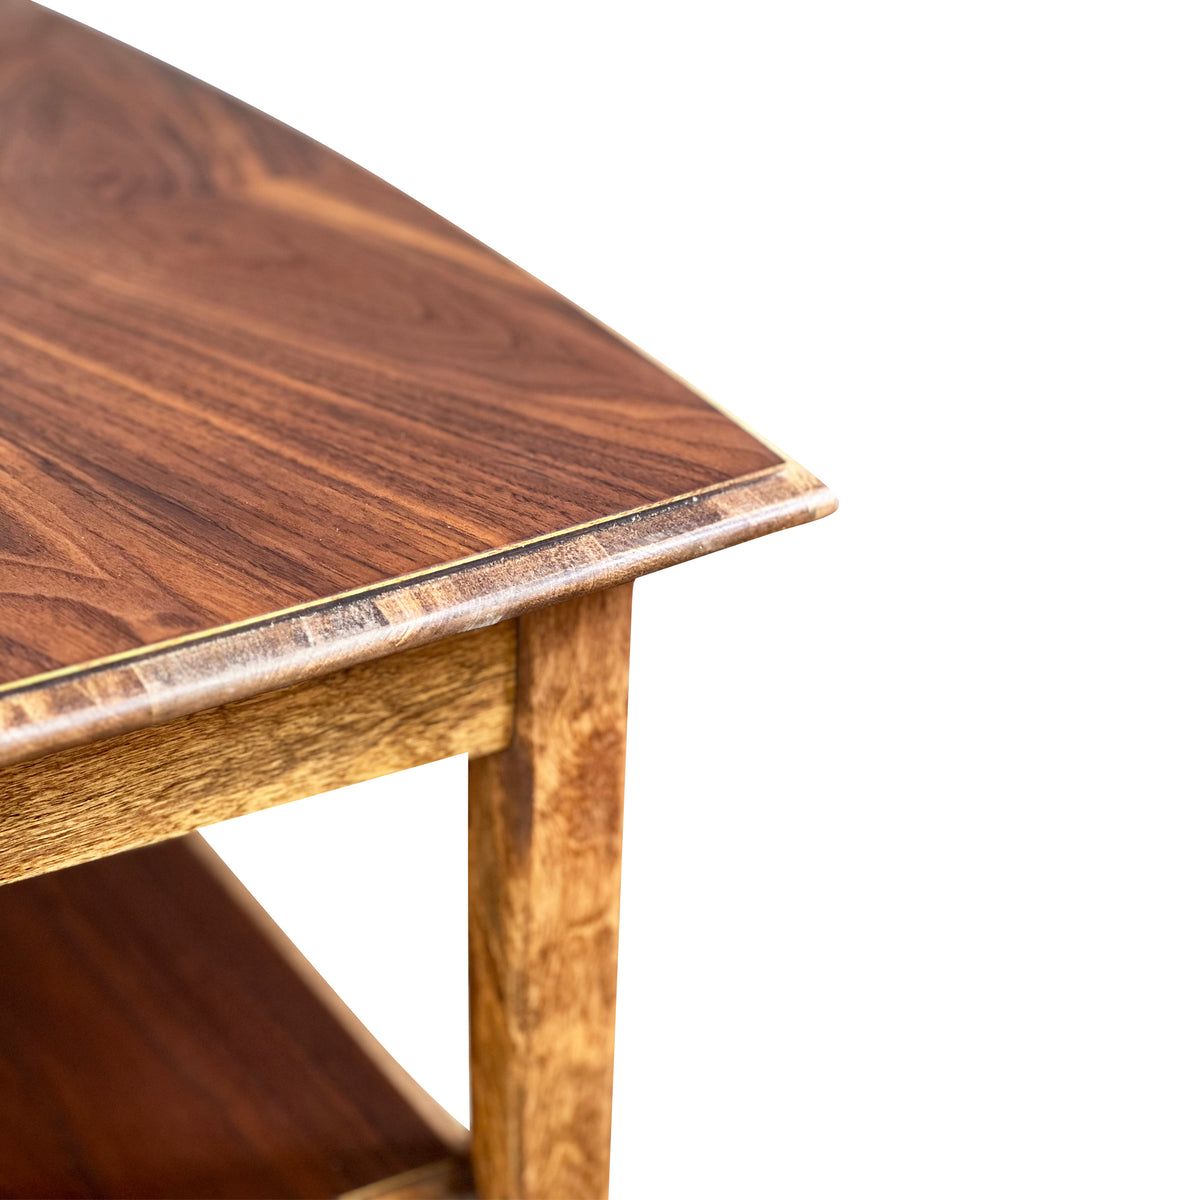 Pair of Walnut and Birch Side Tables by Kaufman